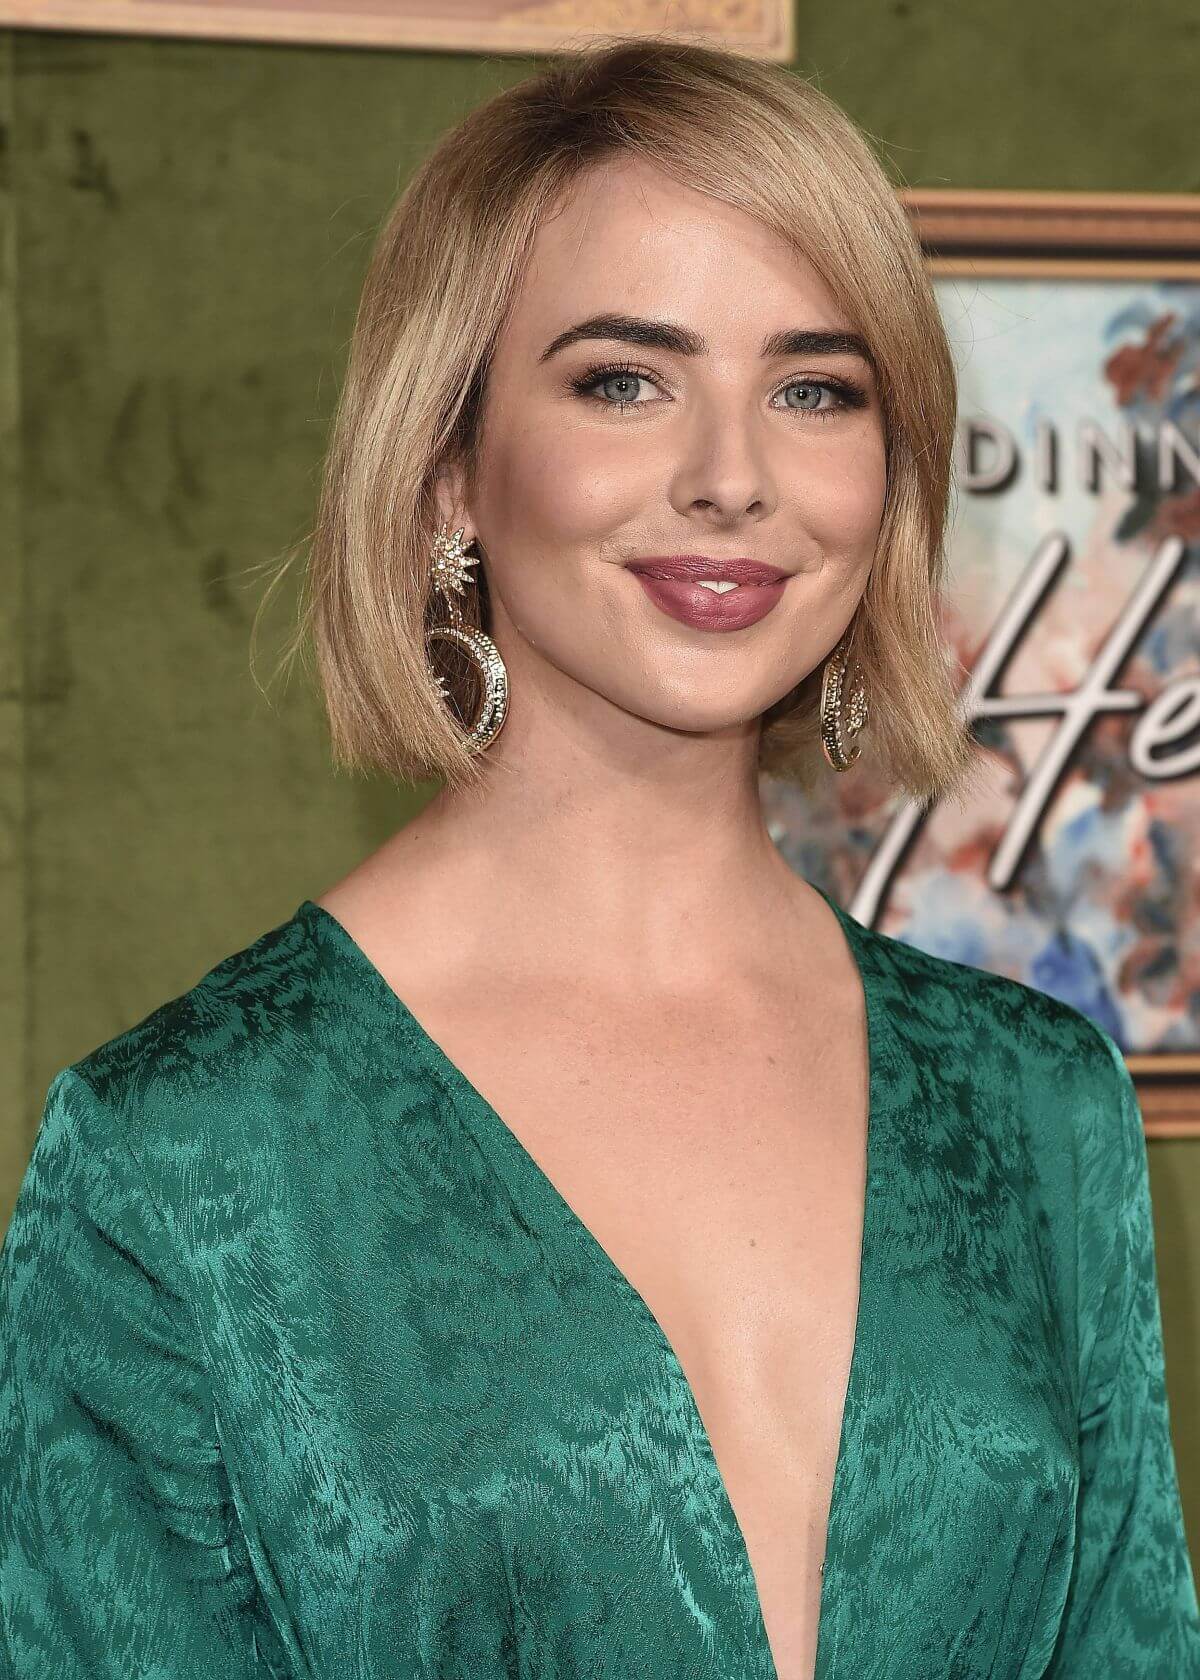 49 Hot Pictures Of Ashleigh Brewer Show Off Her Sexy Body | Best Of Comic Books